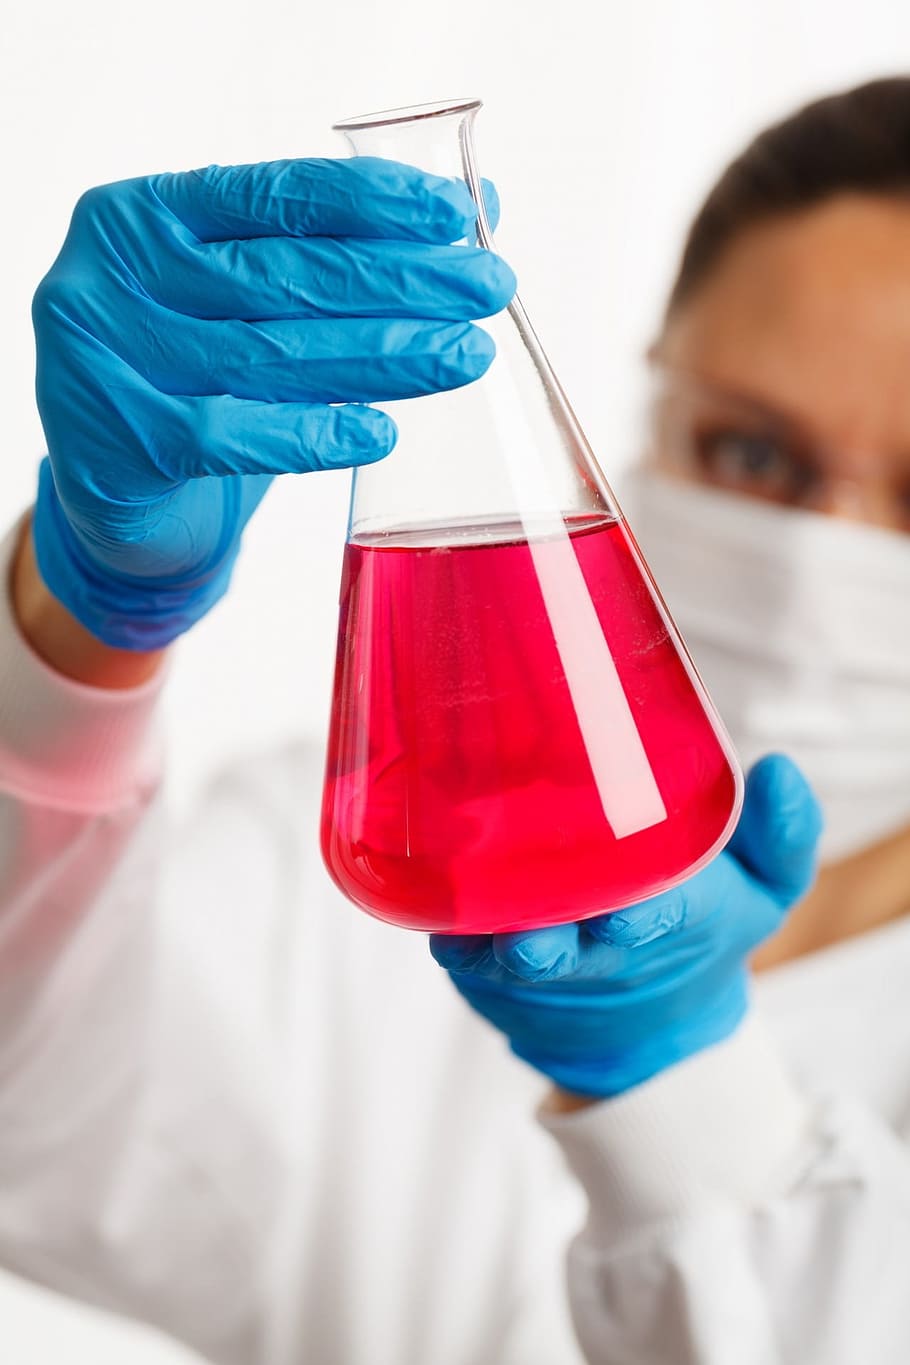 person, white, laboratory gown, blue, gloves, holding, clear, glass laboratory flask, red, liquid